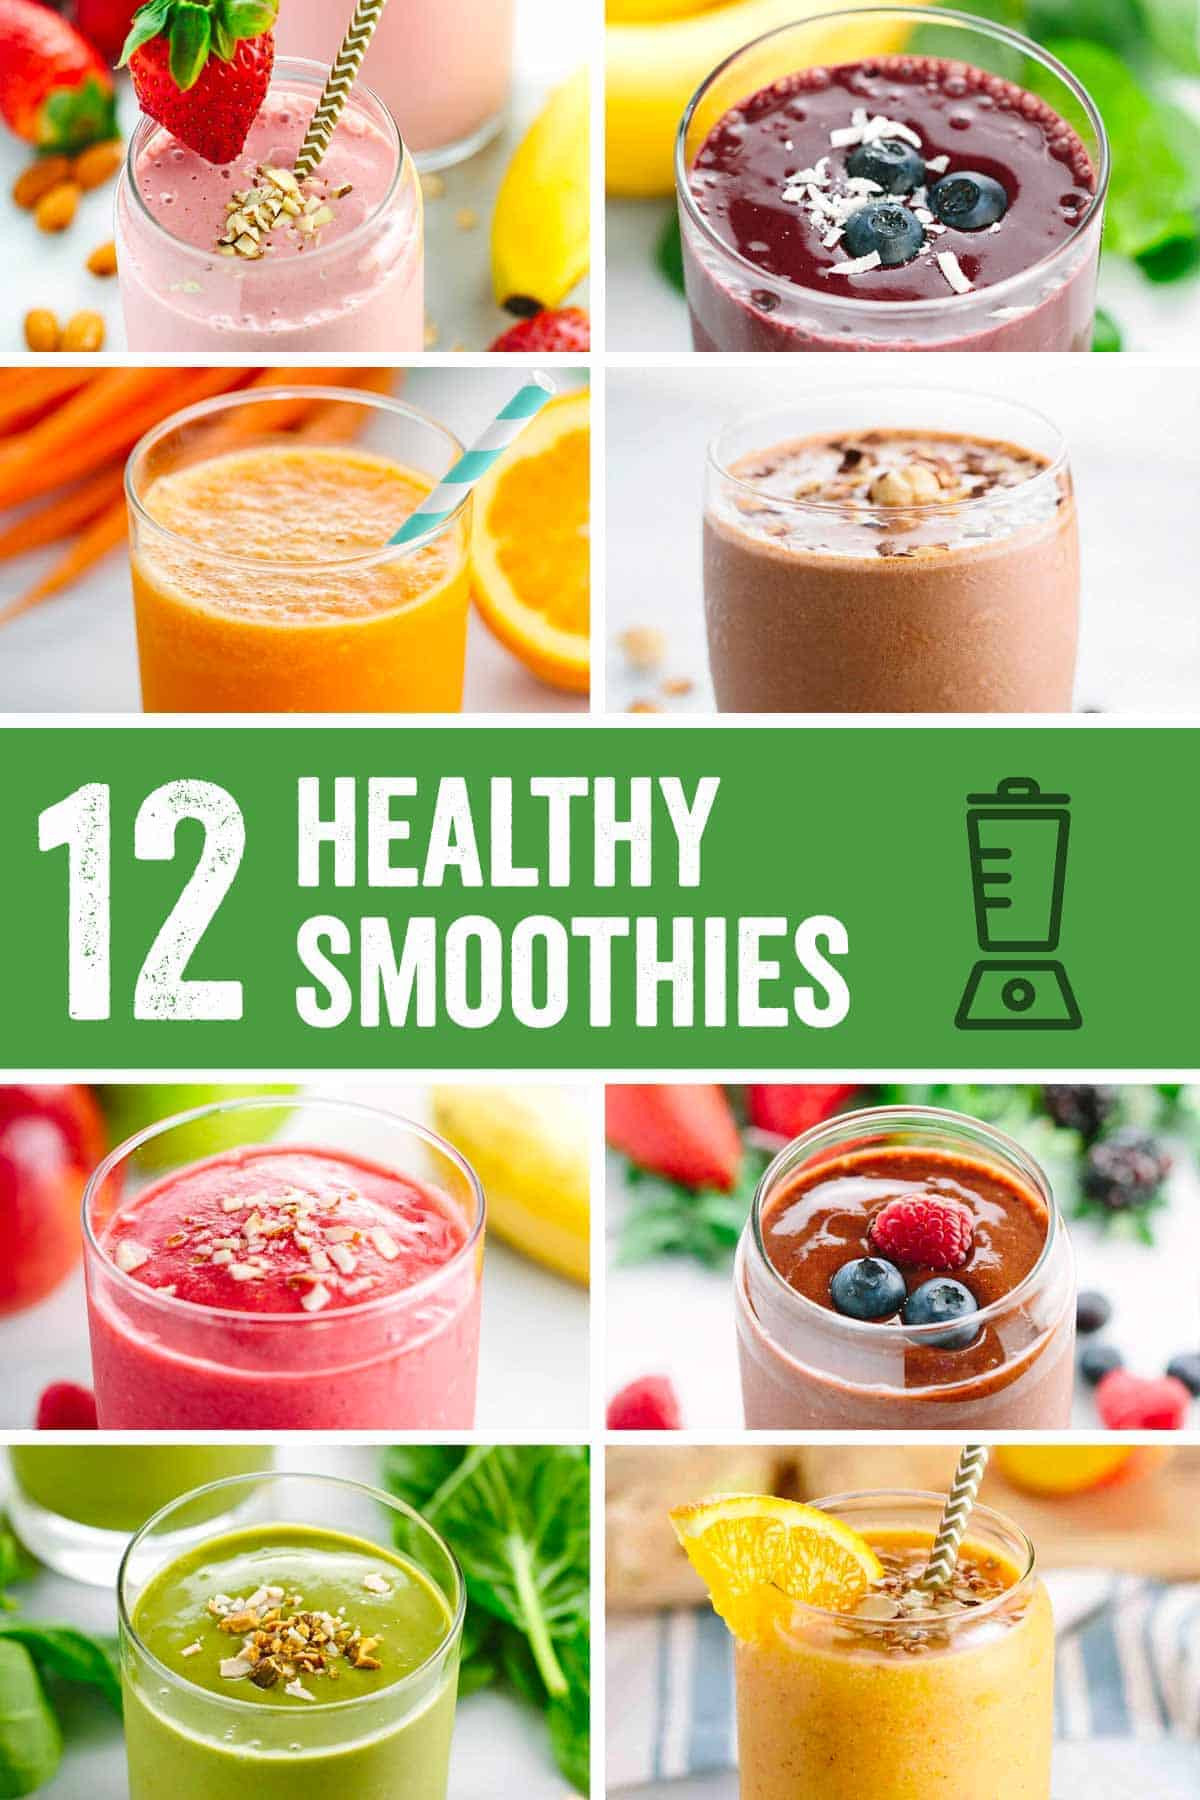 Quick Smoothie Recipes
 Roundup Easy Five Minute Healthy Smoothie Recipes